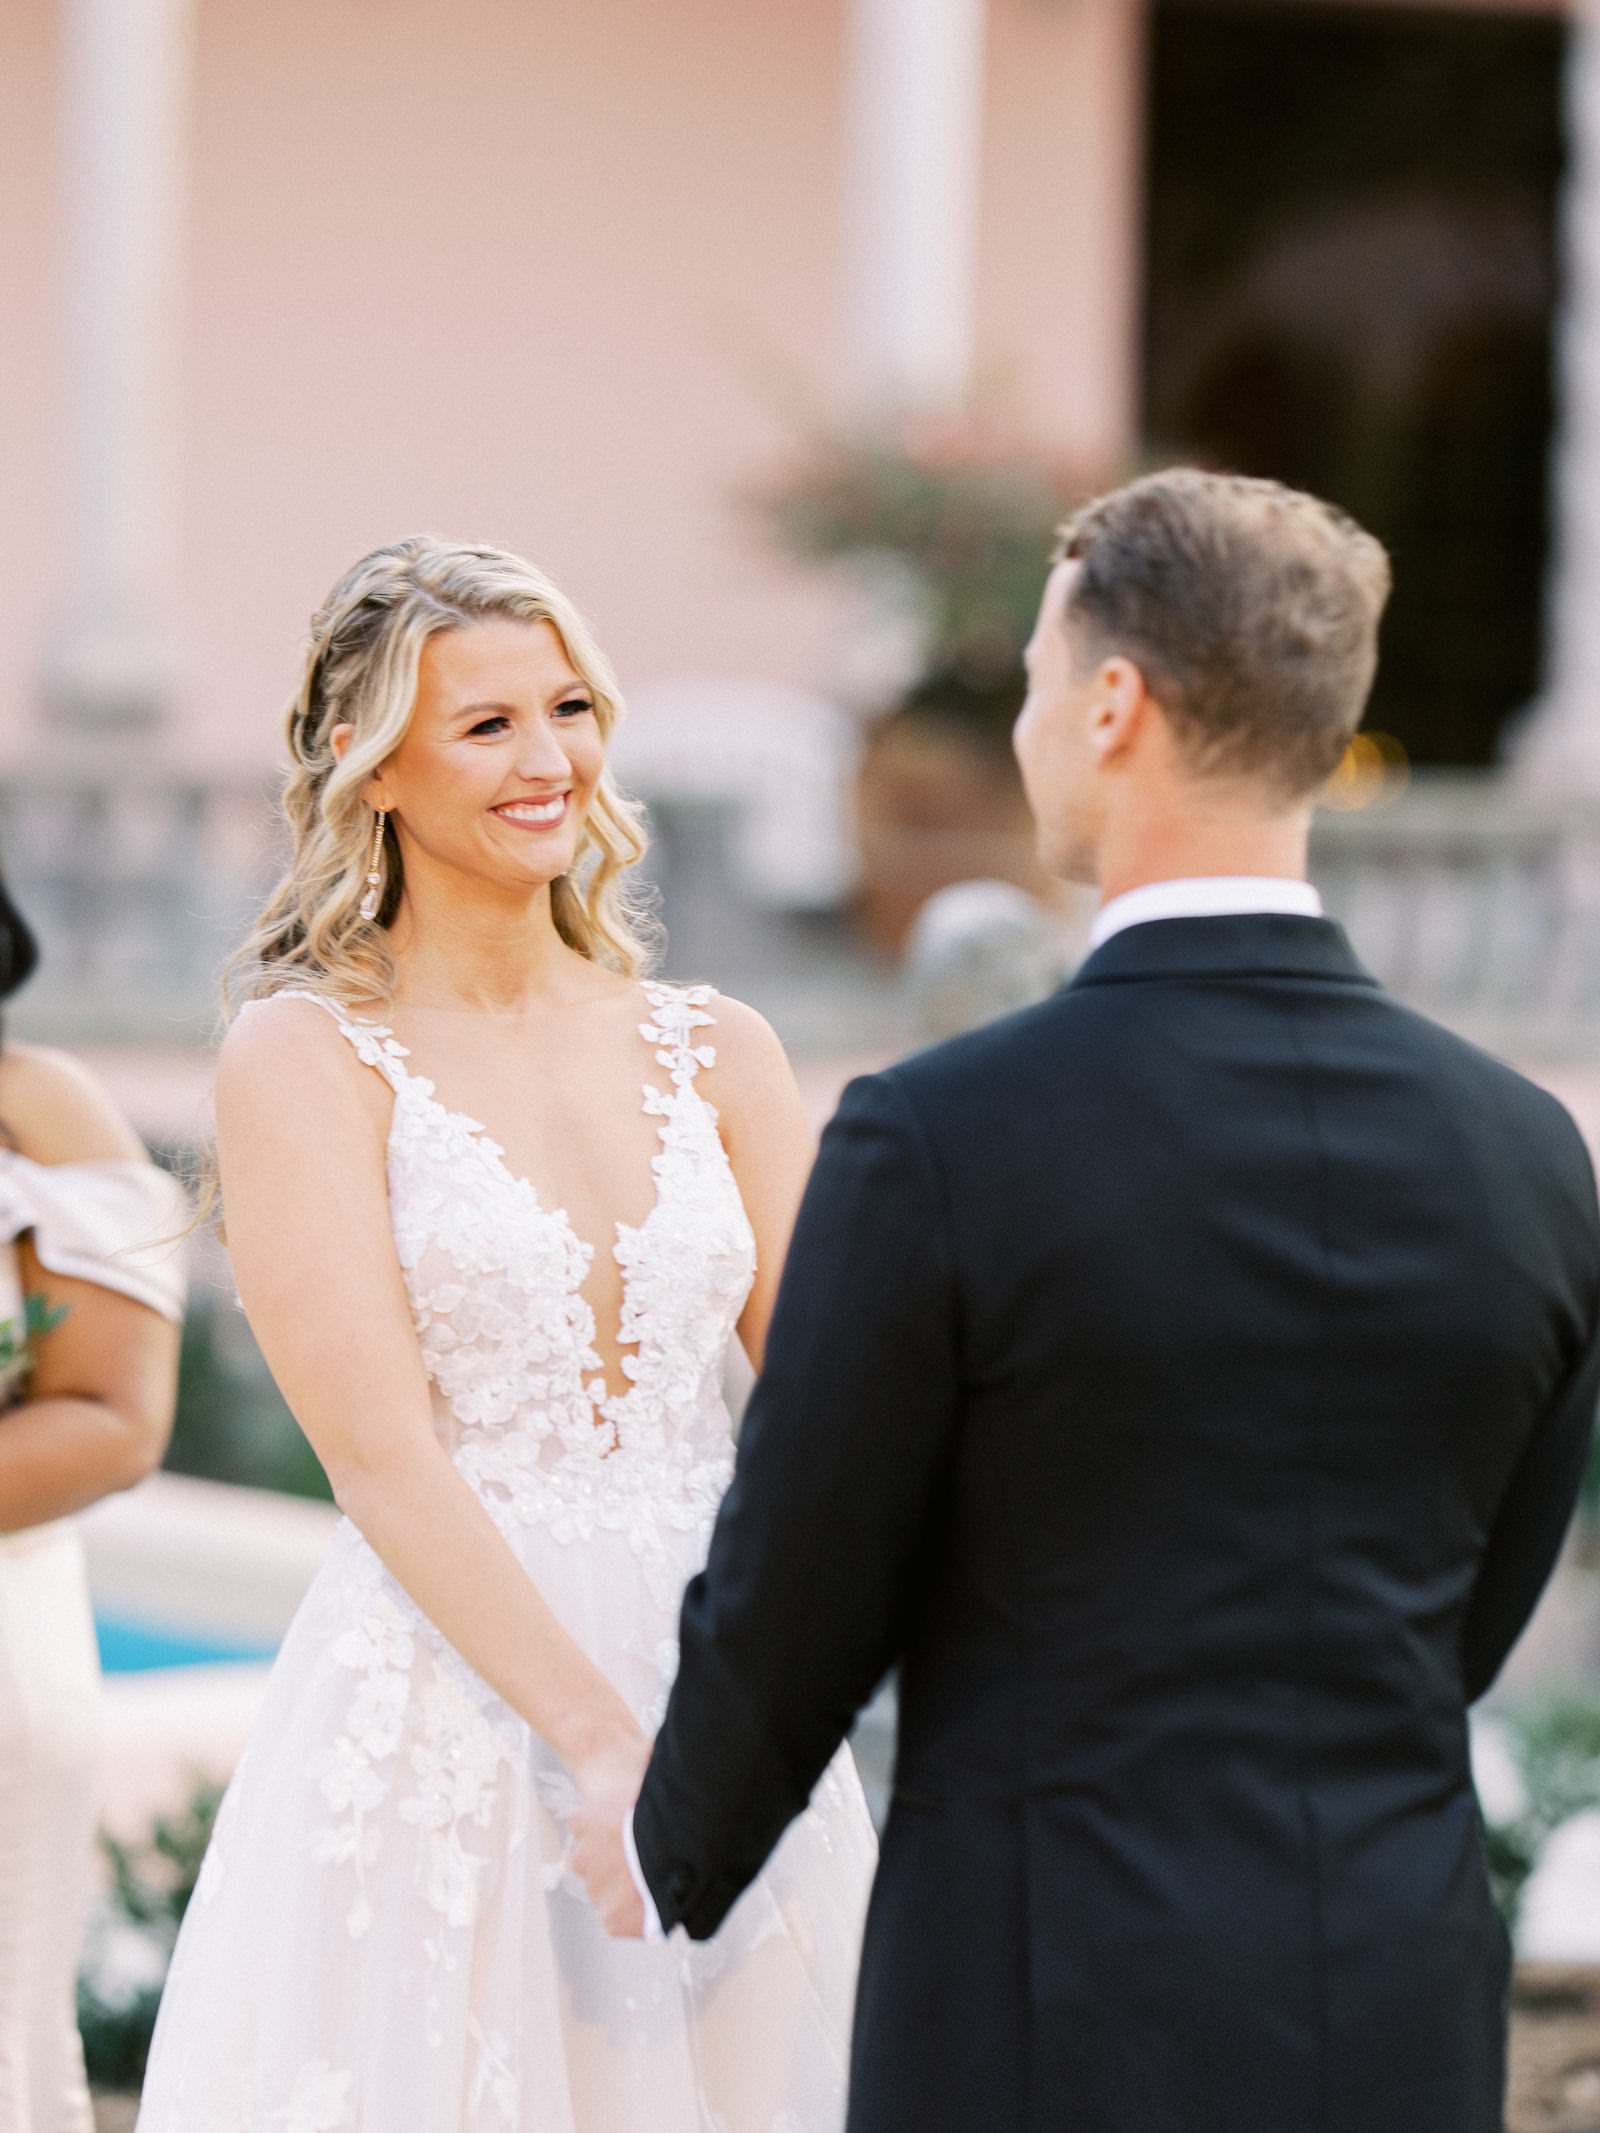 Fairytale Inspired Bride and Groom Exchange Vows During Outdoor Garden Inspired Wedding Ceremony, Bride Wearing Whimsical Galia Lahav Wedding Dress | Tampa Bay Hair and Makeup Artist Femme Akoi Beauty Studios | Tampa Luxury Bridal Attire Salon Isabel O'Neil Bridal